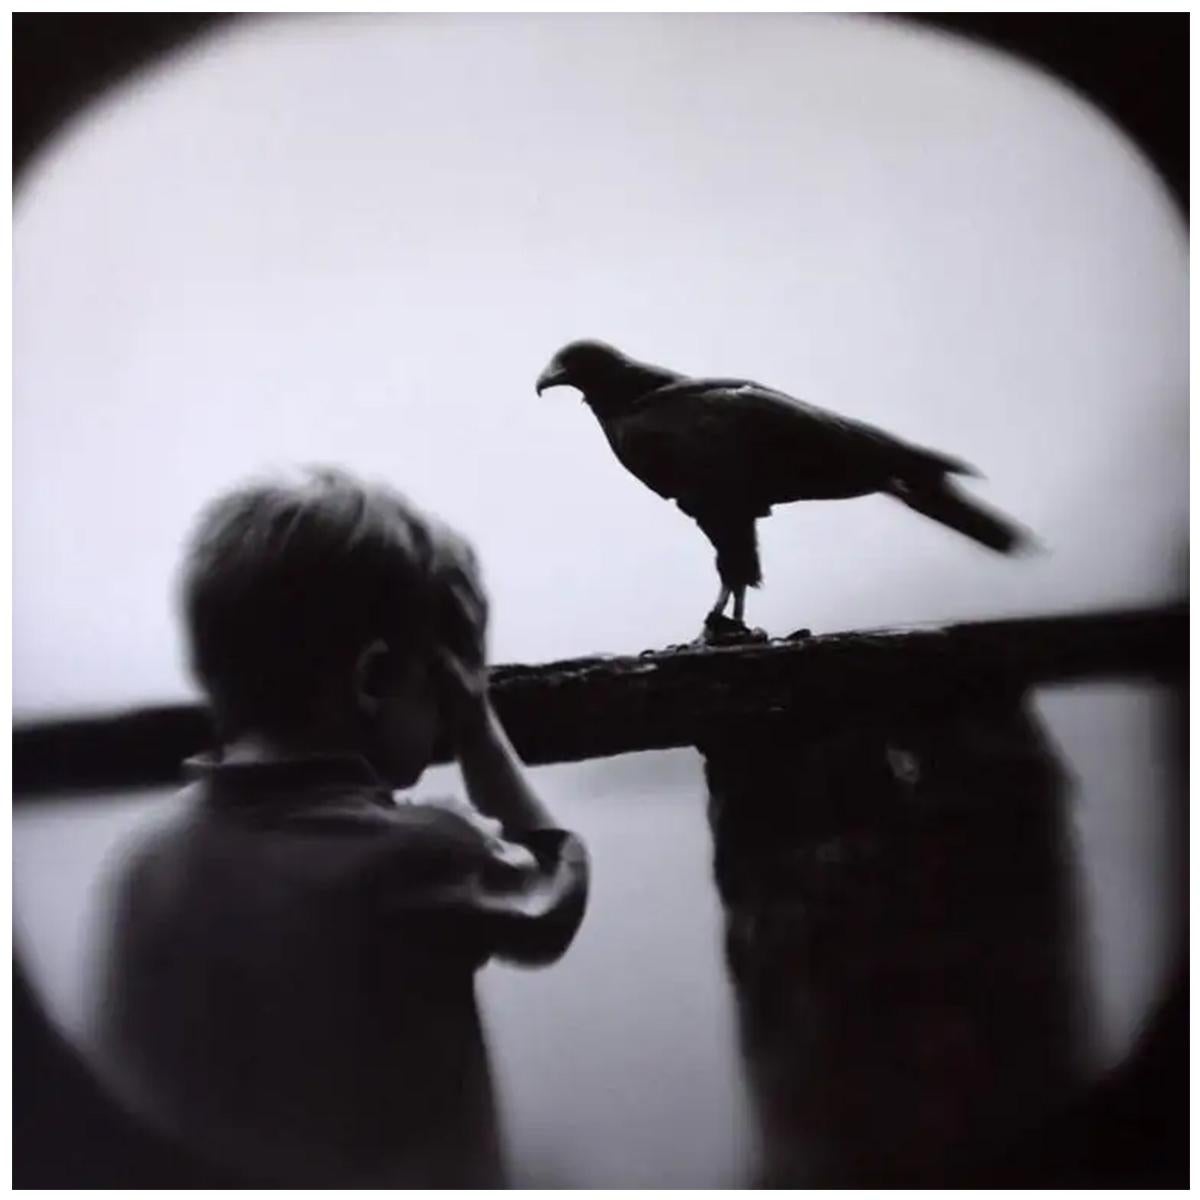 Keith Carter b.1948 Figurative Photograph - Boy and Hawk by Keith Carter. Signed limited edition 16 x 20" print